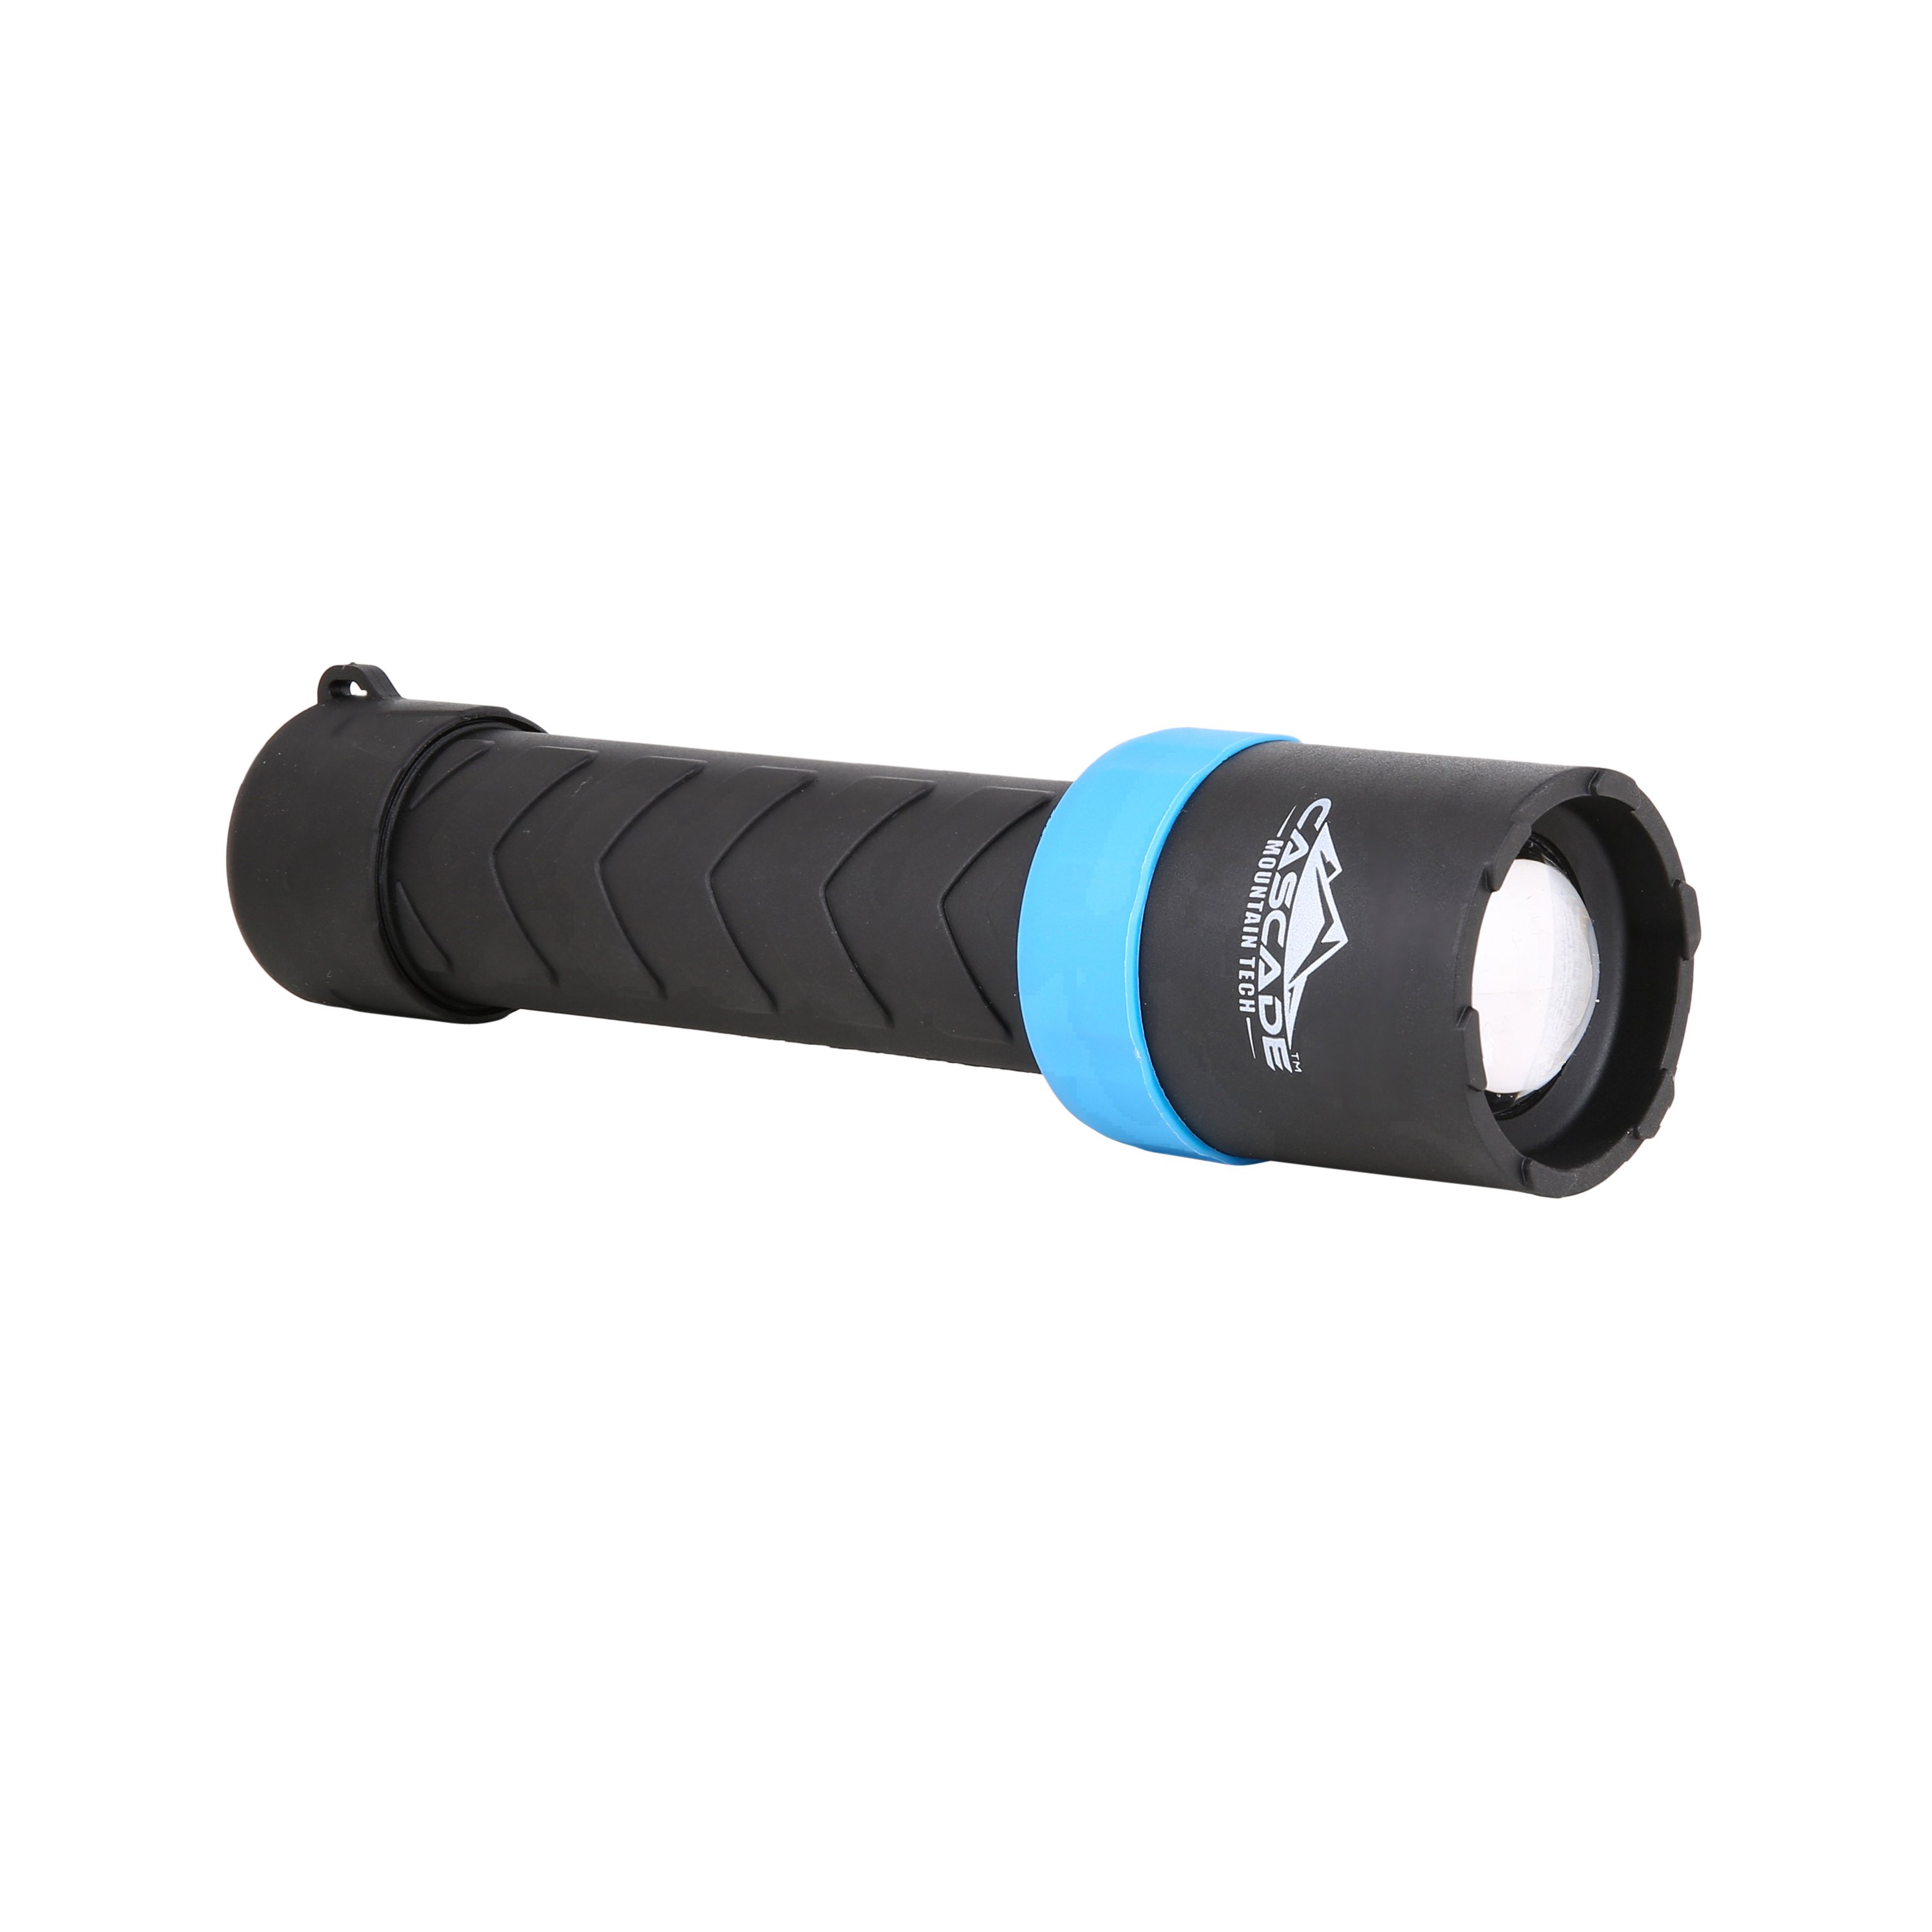 Cascade Mountain Tech STEELCORE™ LED Flashlight, with Emergency Strobe Feature, Light Output of 1000 L, Battery Size AA (Batteries Included) – Light Blue - image 1 of 4